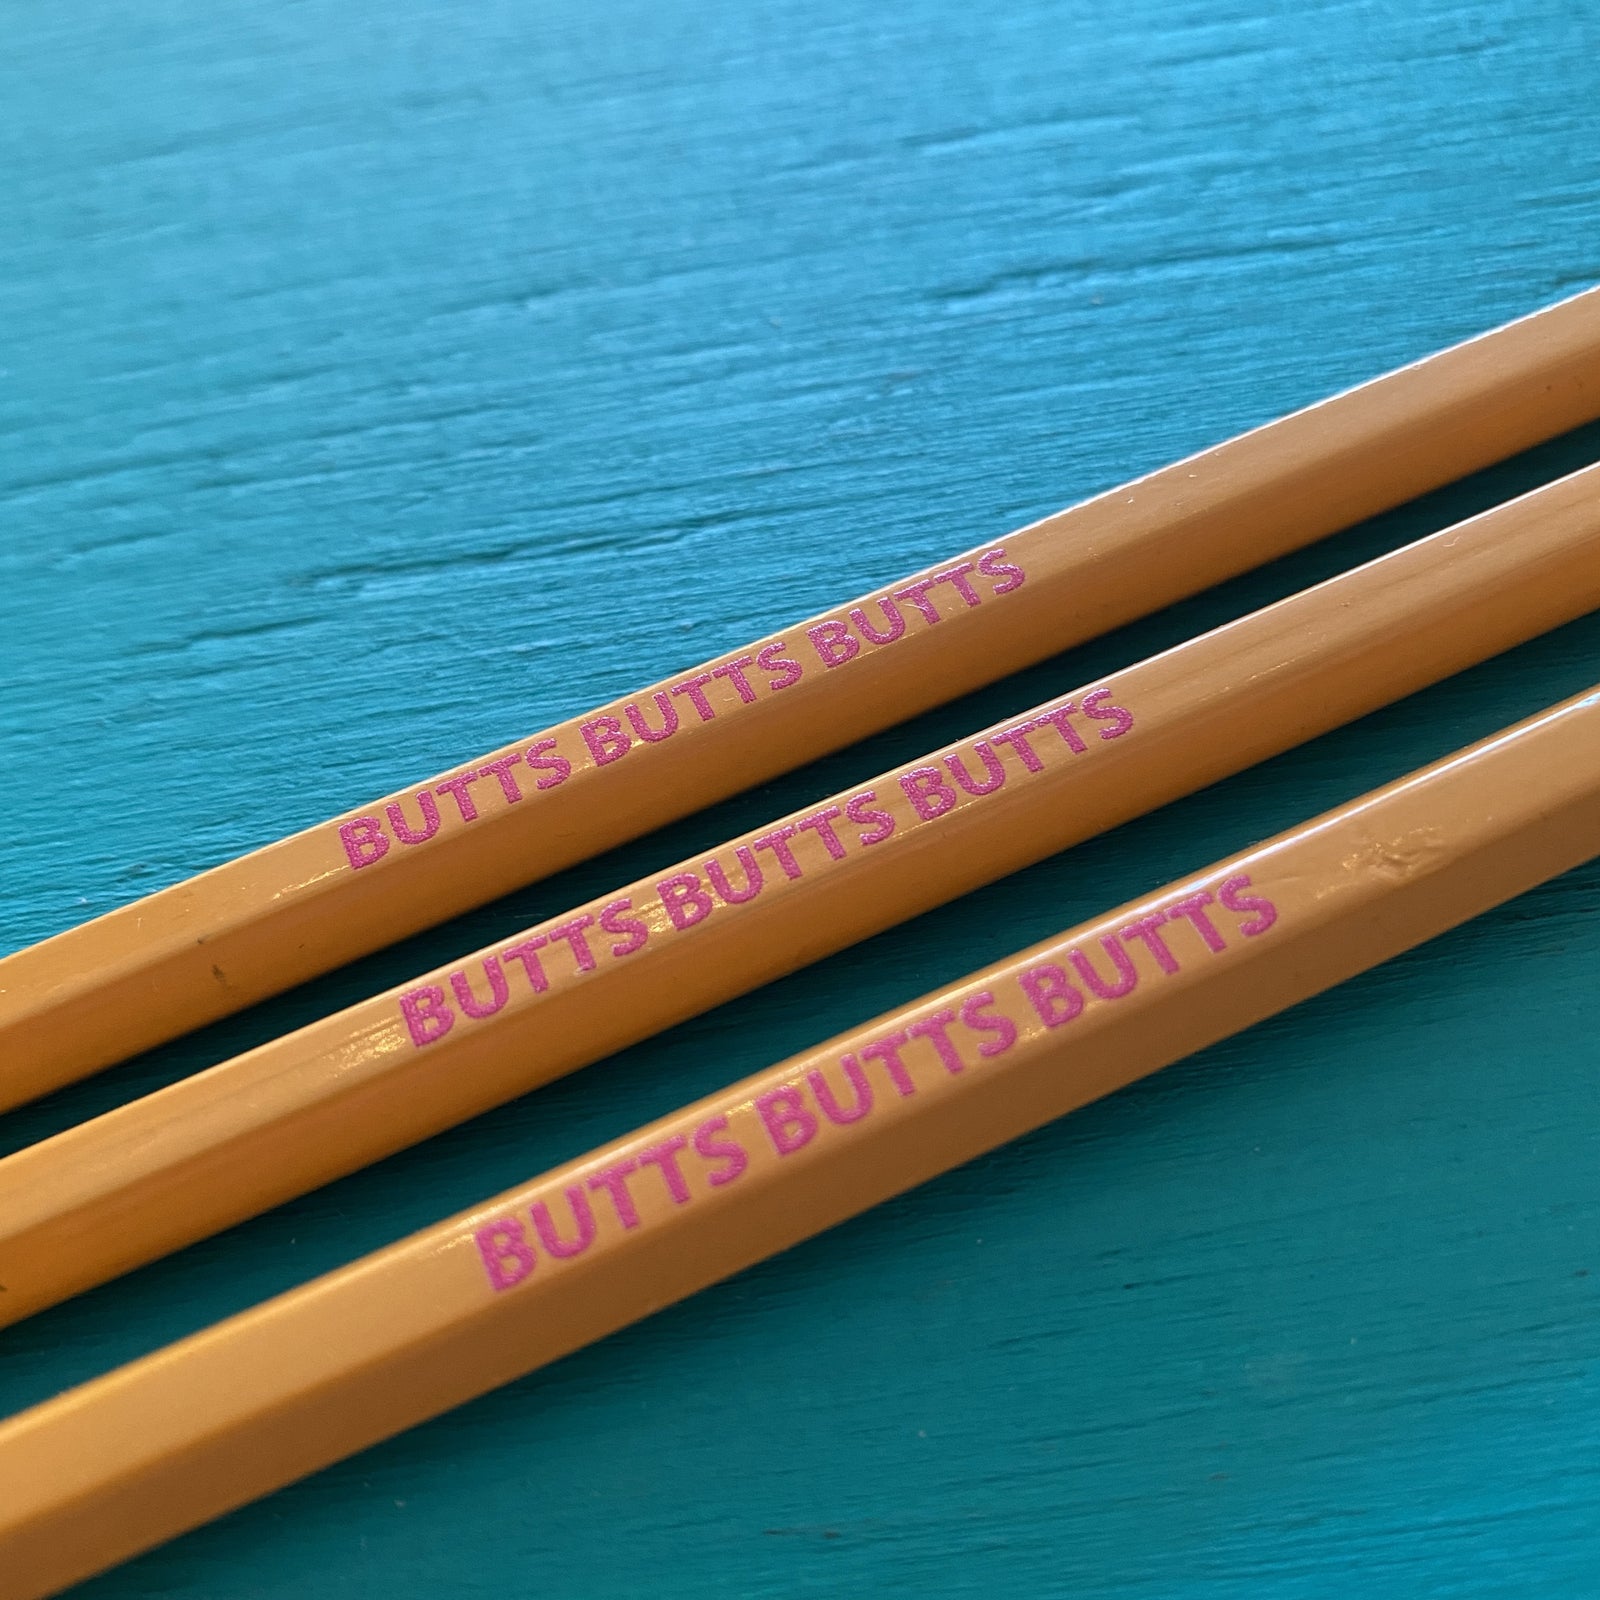 Pencil Three Pack - Butts Butts Butts